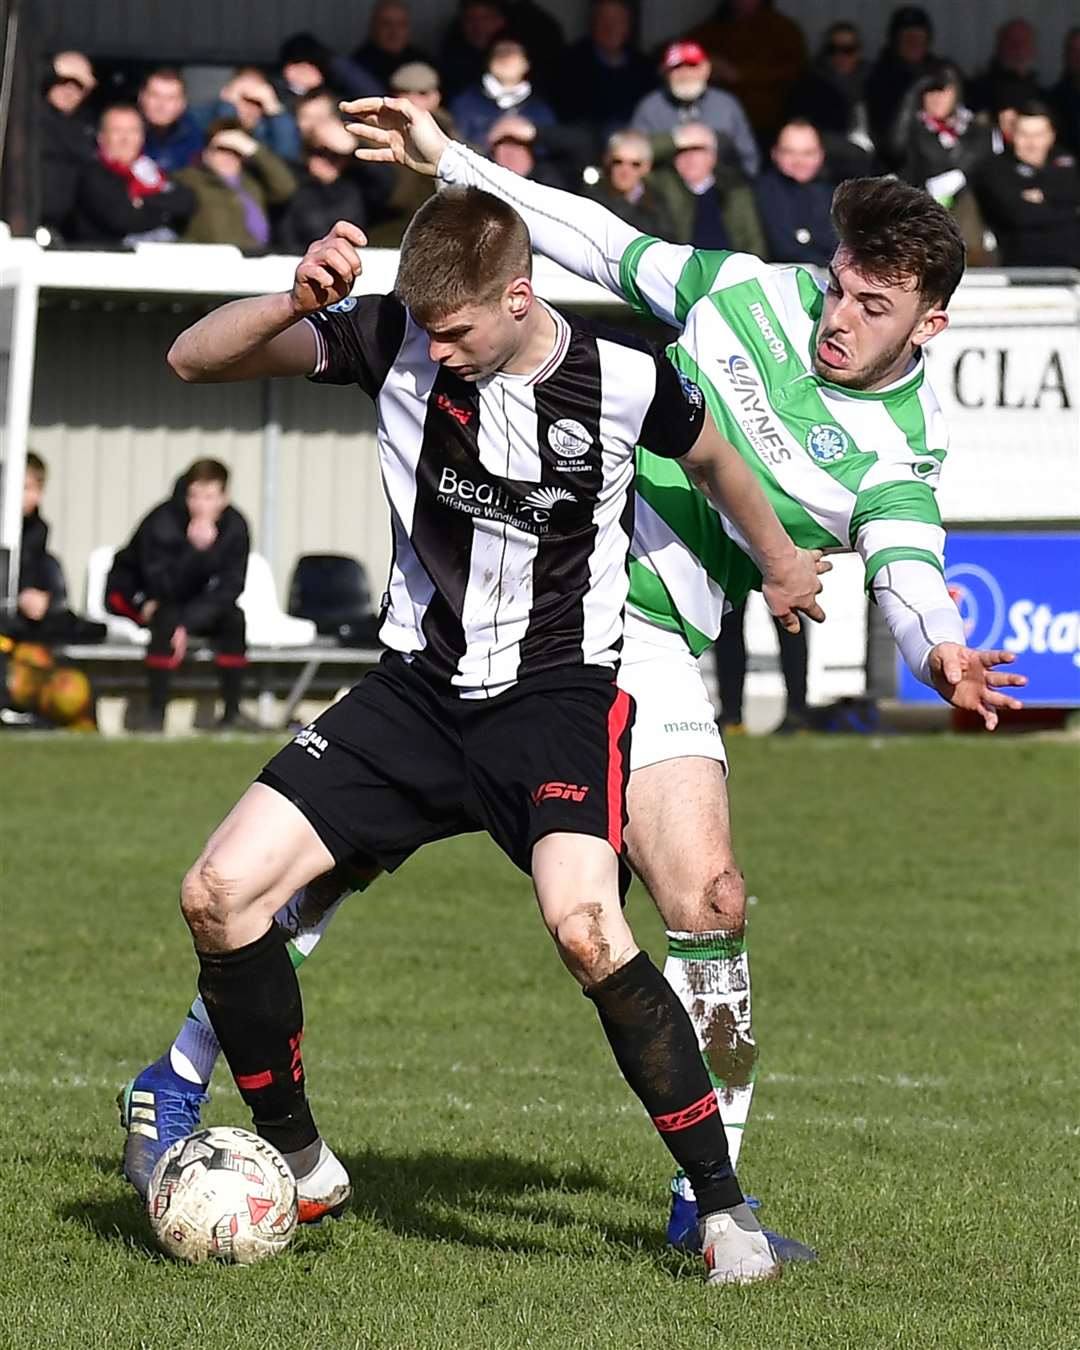 Wick's Marc Macgregor shields ball from Buckie's Sam Morrison at Harmsworth Park last Saturday. Macgregor scored both goals as Academy won 2-0 to extend their unbeaten run in the Highland League to eight matches. Picture: Mel Roger